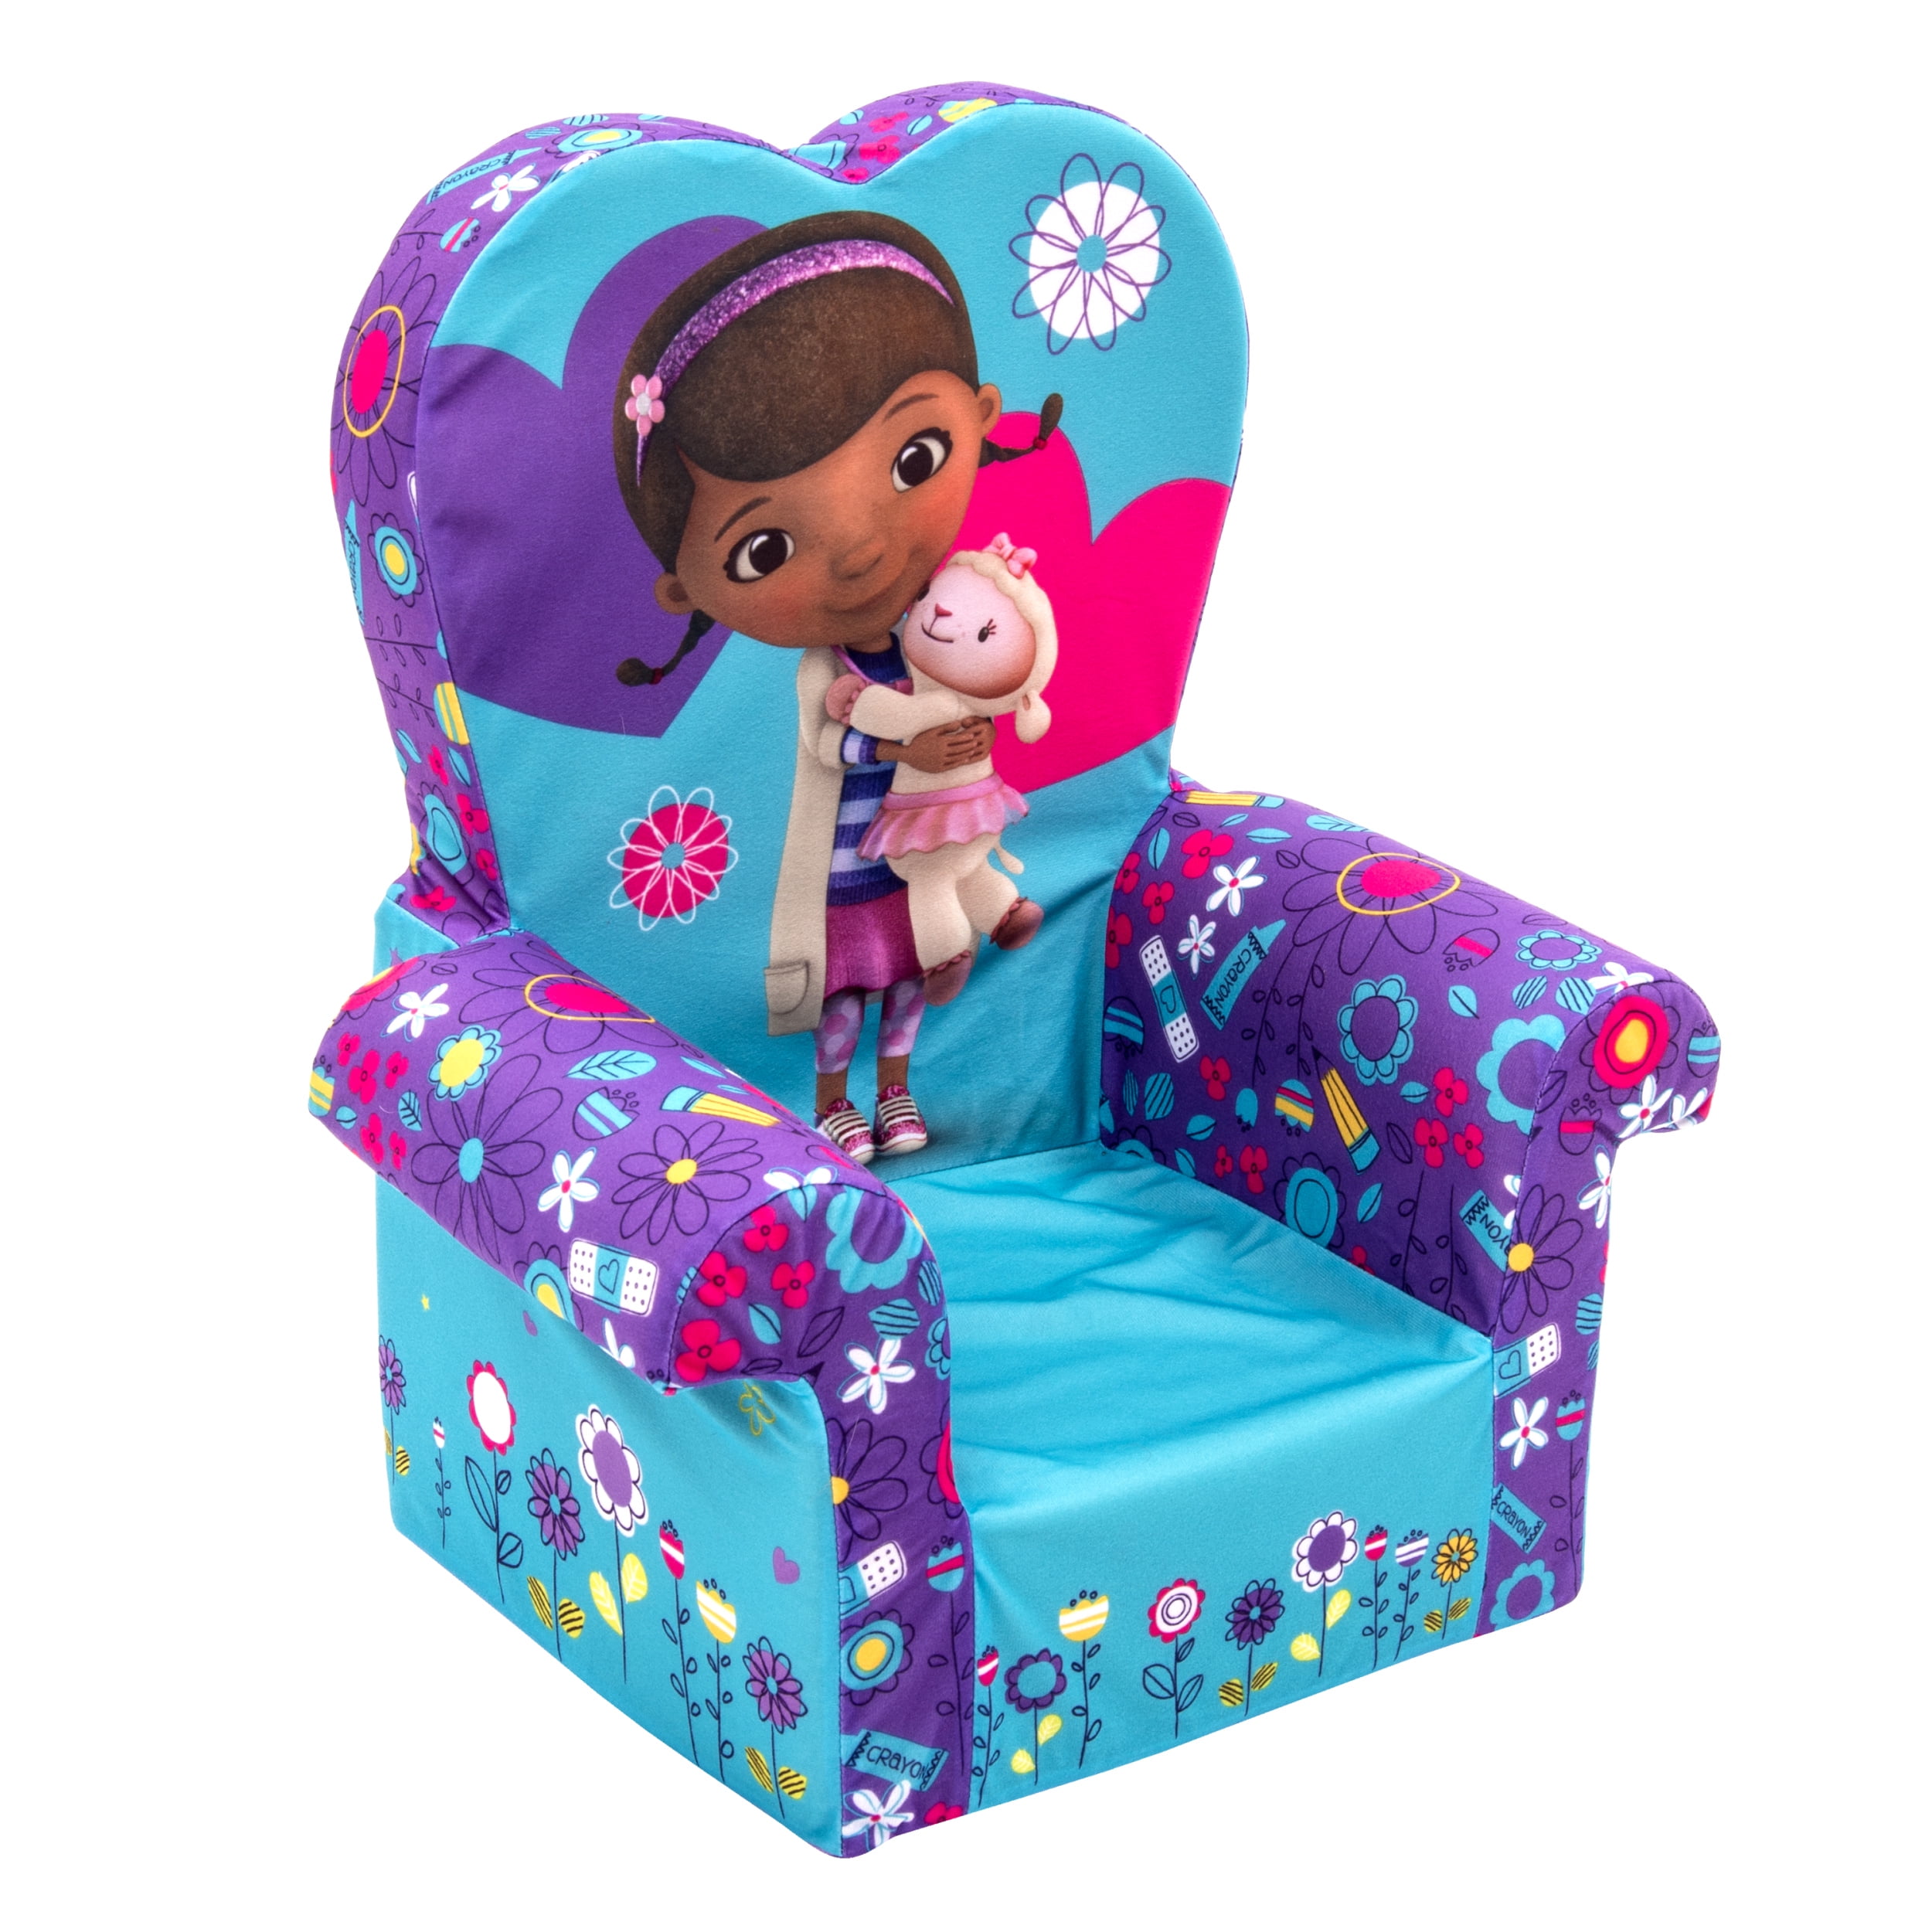 Disney Doc McStuffins Kids and Toddlers Sofa Bean Bag Chair Made In USA 